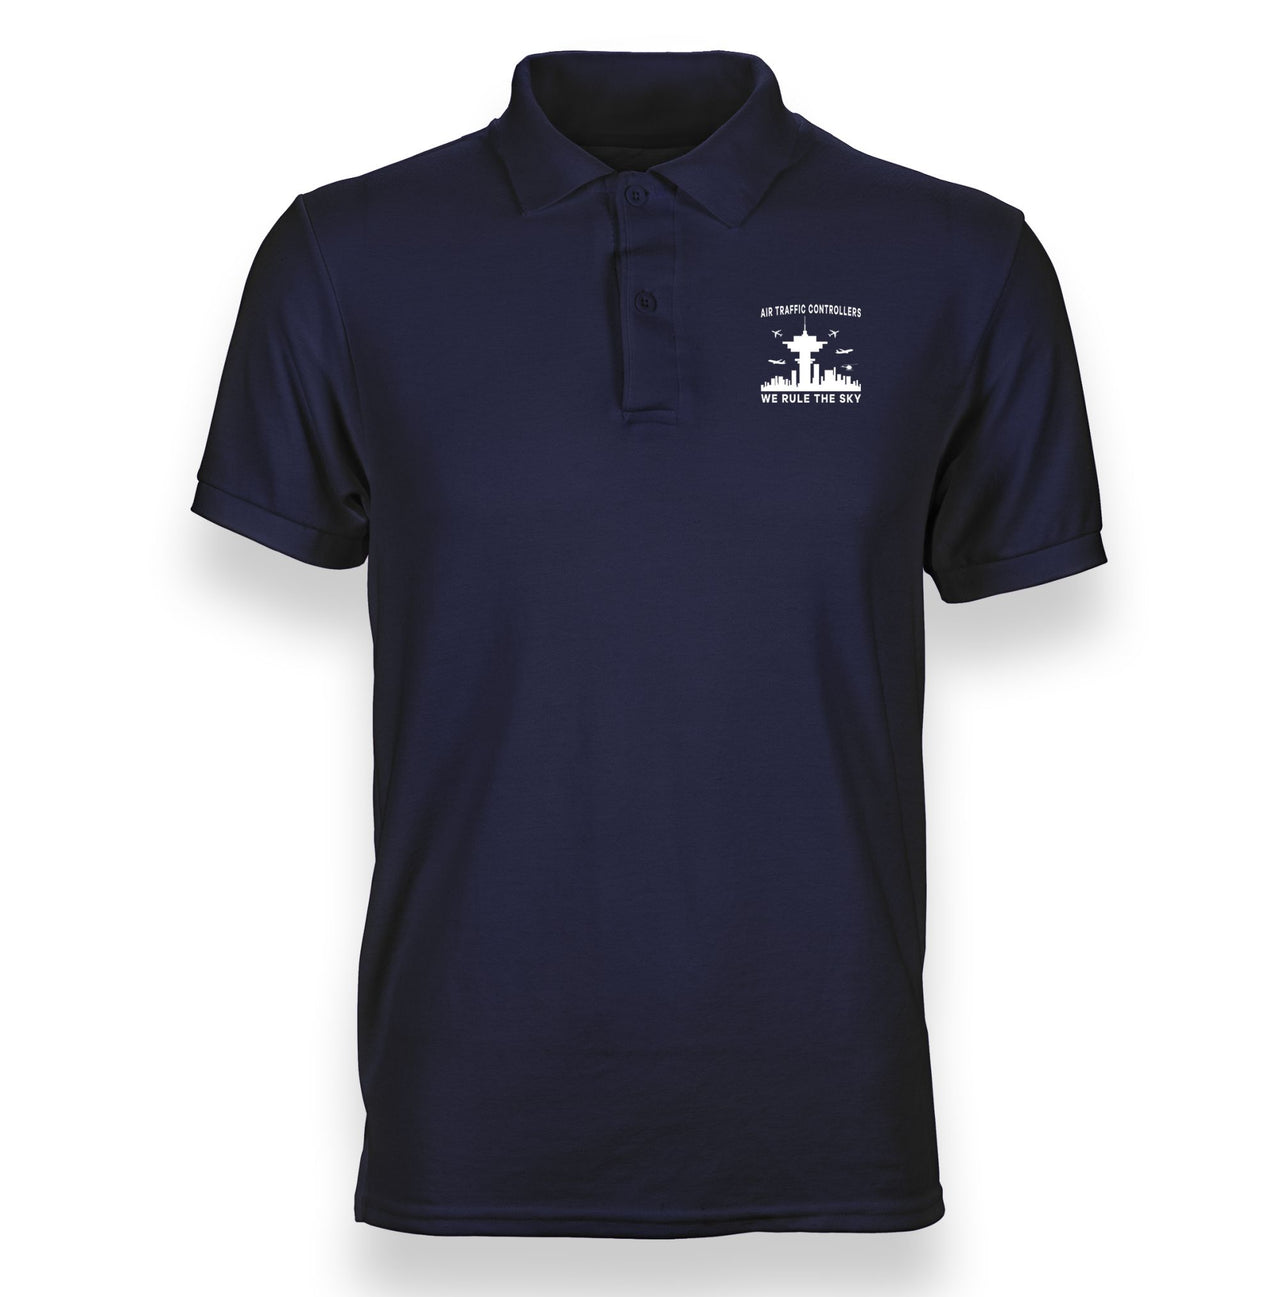 Air Traffic Controllers - We Rule The Sky Designed "WOMEN" Polo T-Shirts